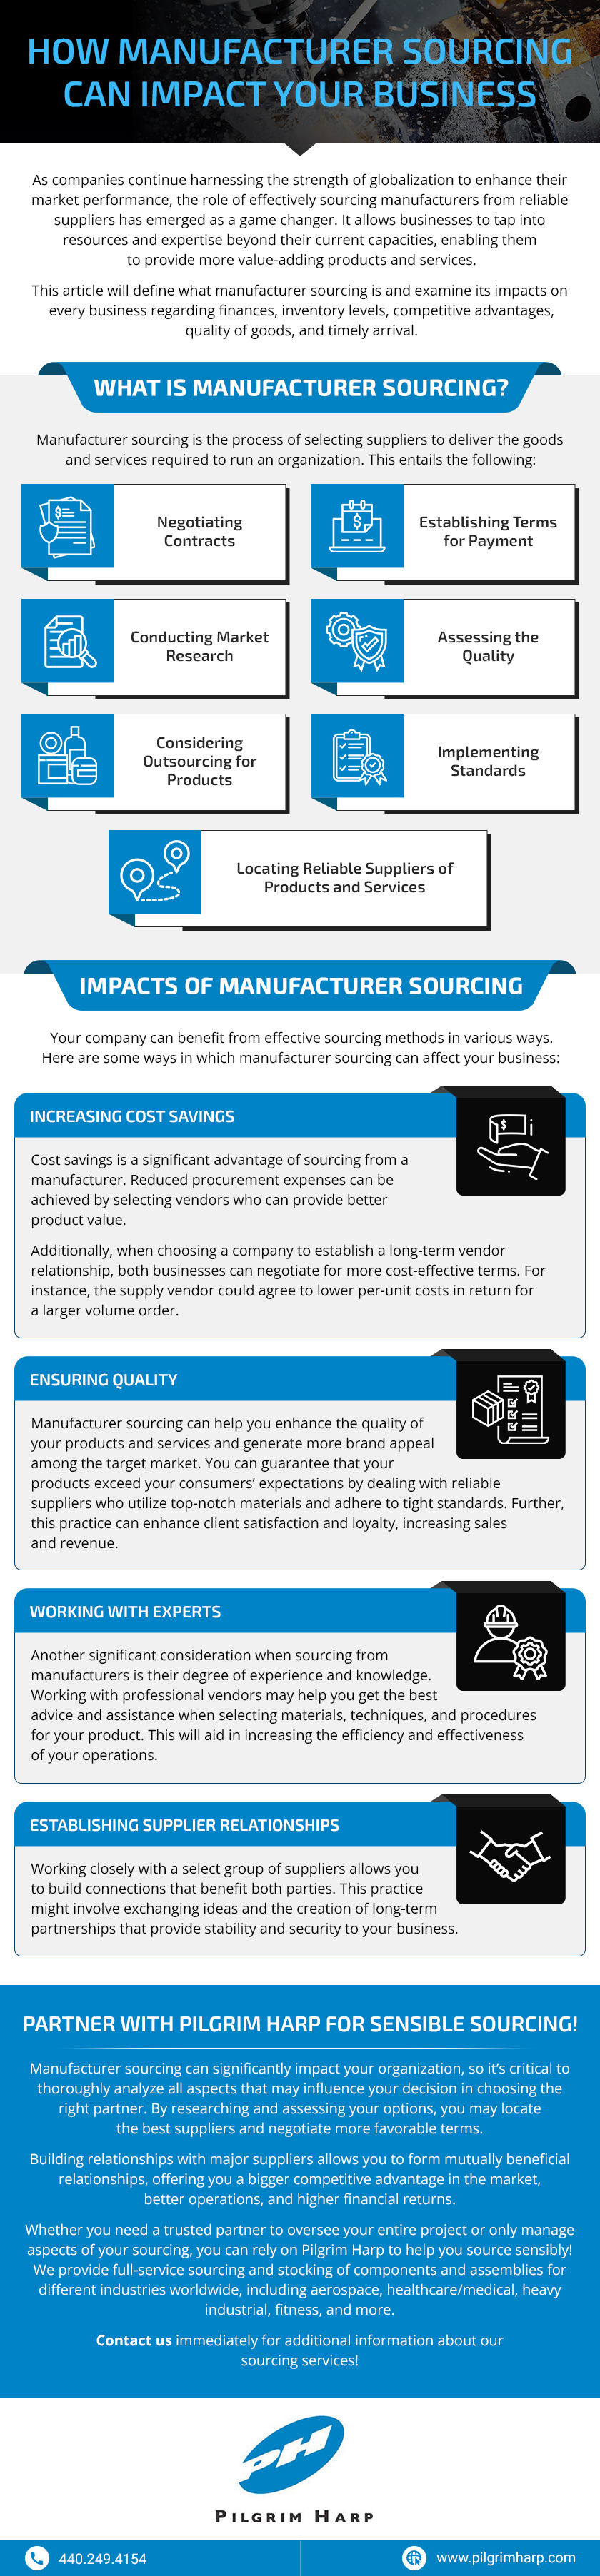 How-Manufacturer-Sourcing-Can-Impact-Your-Business